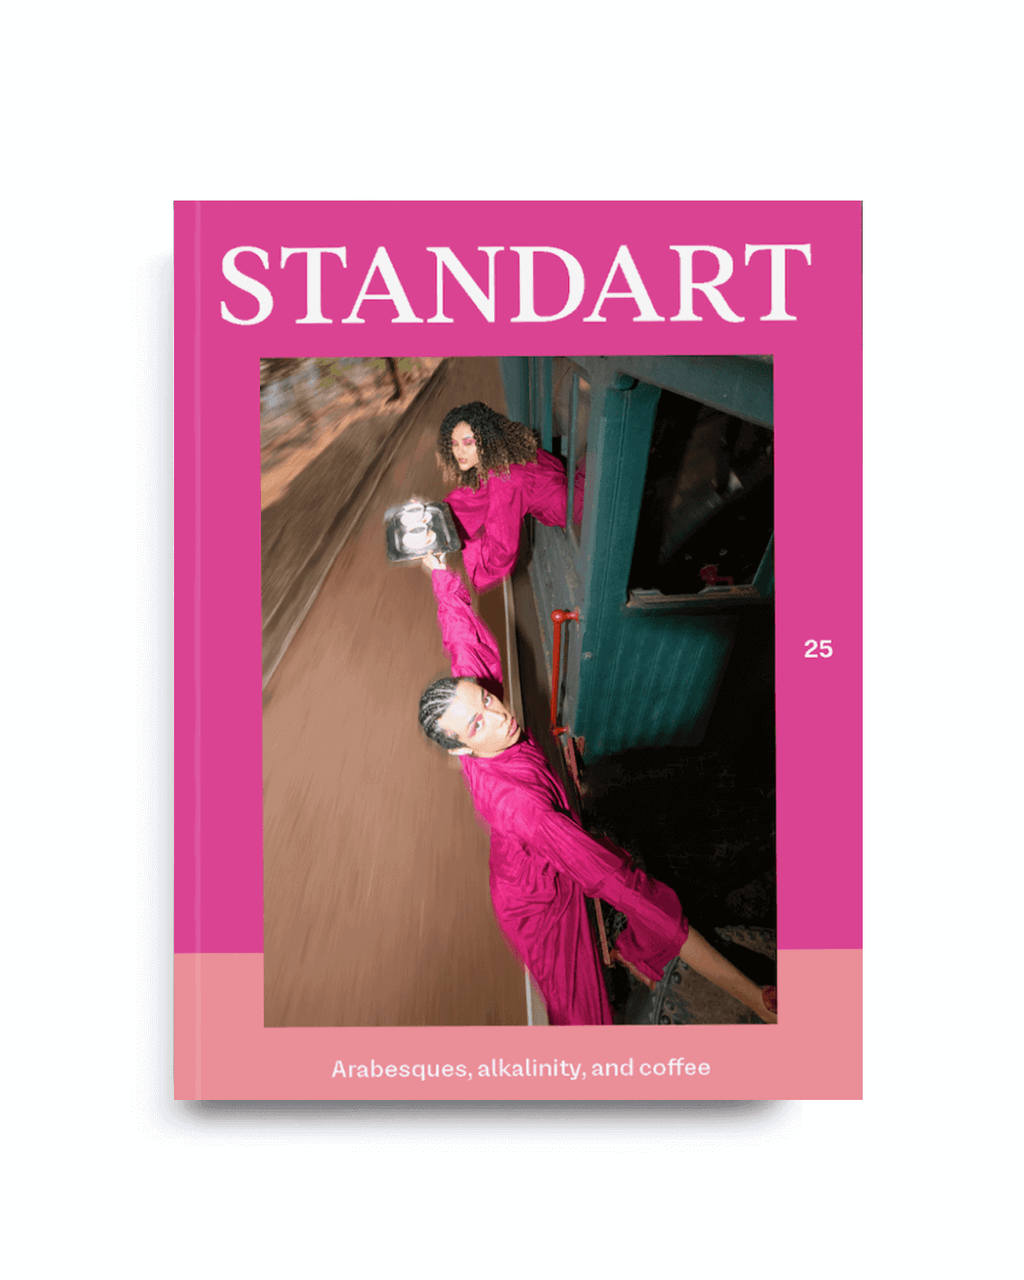 Issue 25: Arabesques, alkalinity, and coffee – Standart